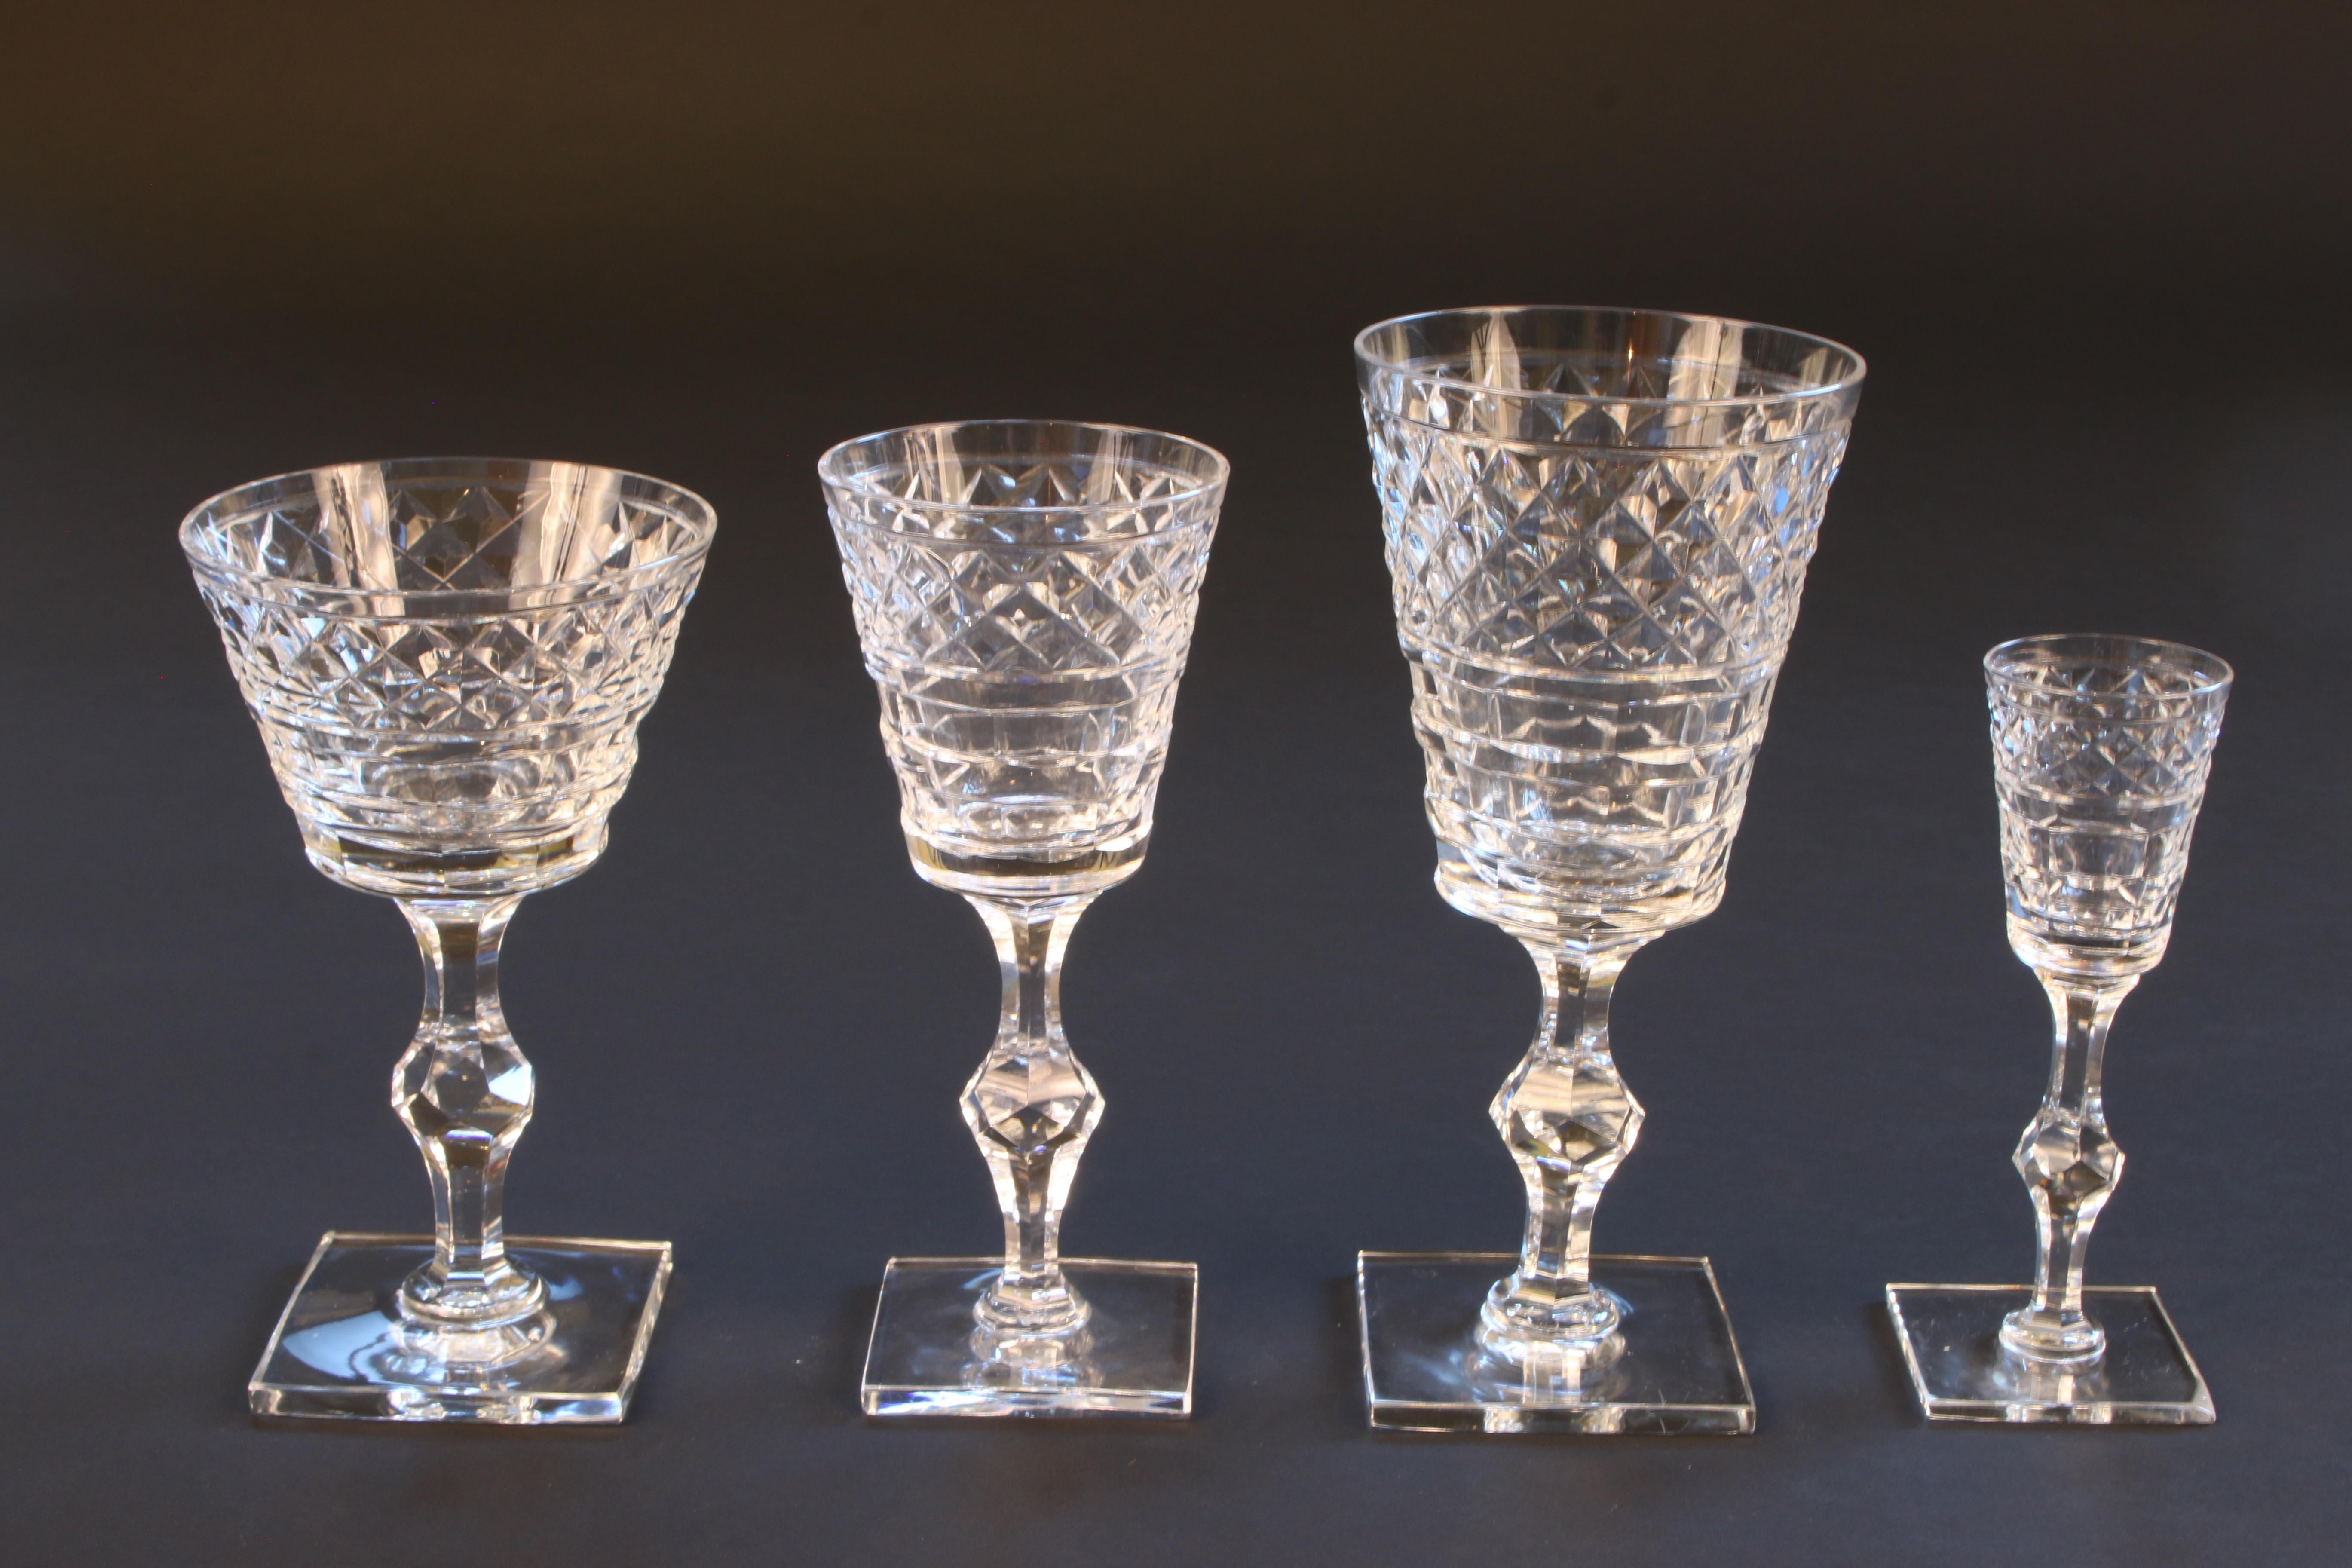 This is a rare vintage Hawkes hand blown, hand-cut service for 12 with extra pieces. The set contains 12 each of water, wine, champagne and cordial. These are big and heavy glasses, the water goblet is 7 3/4 inches high and weighs over a pound thus